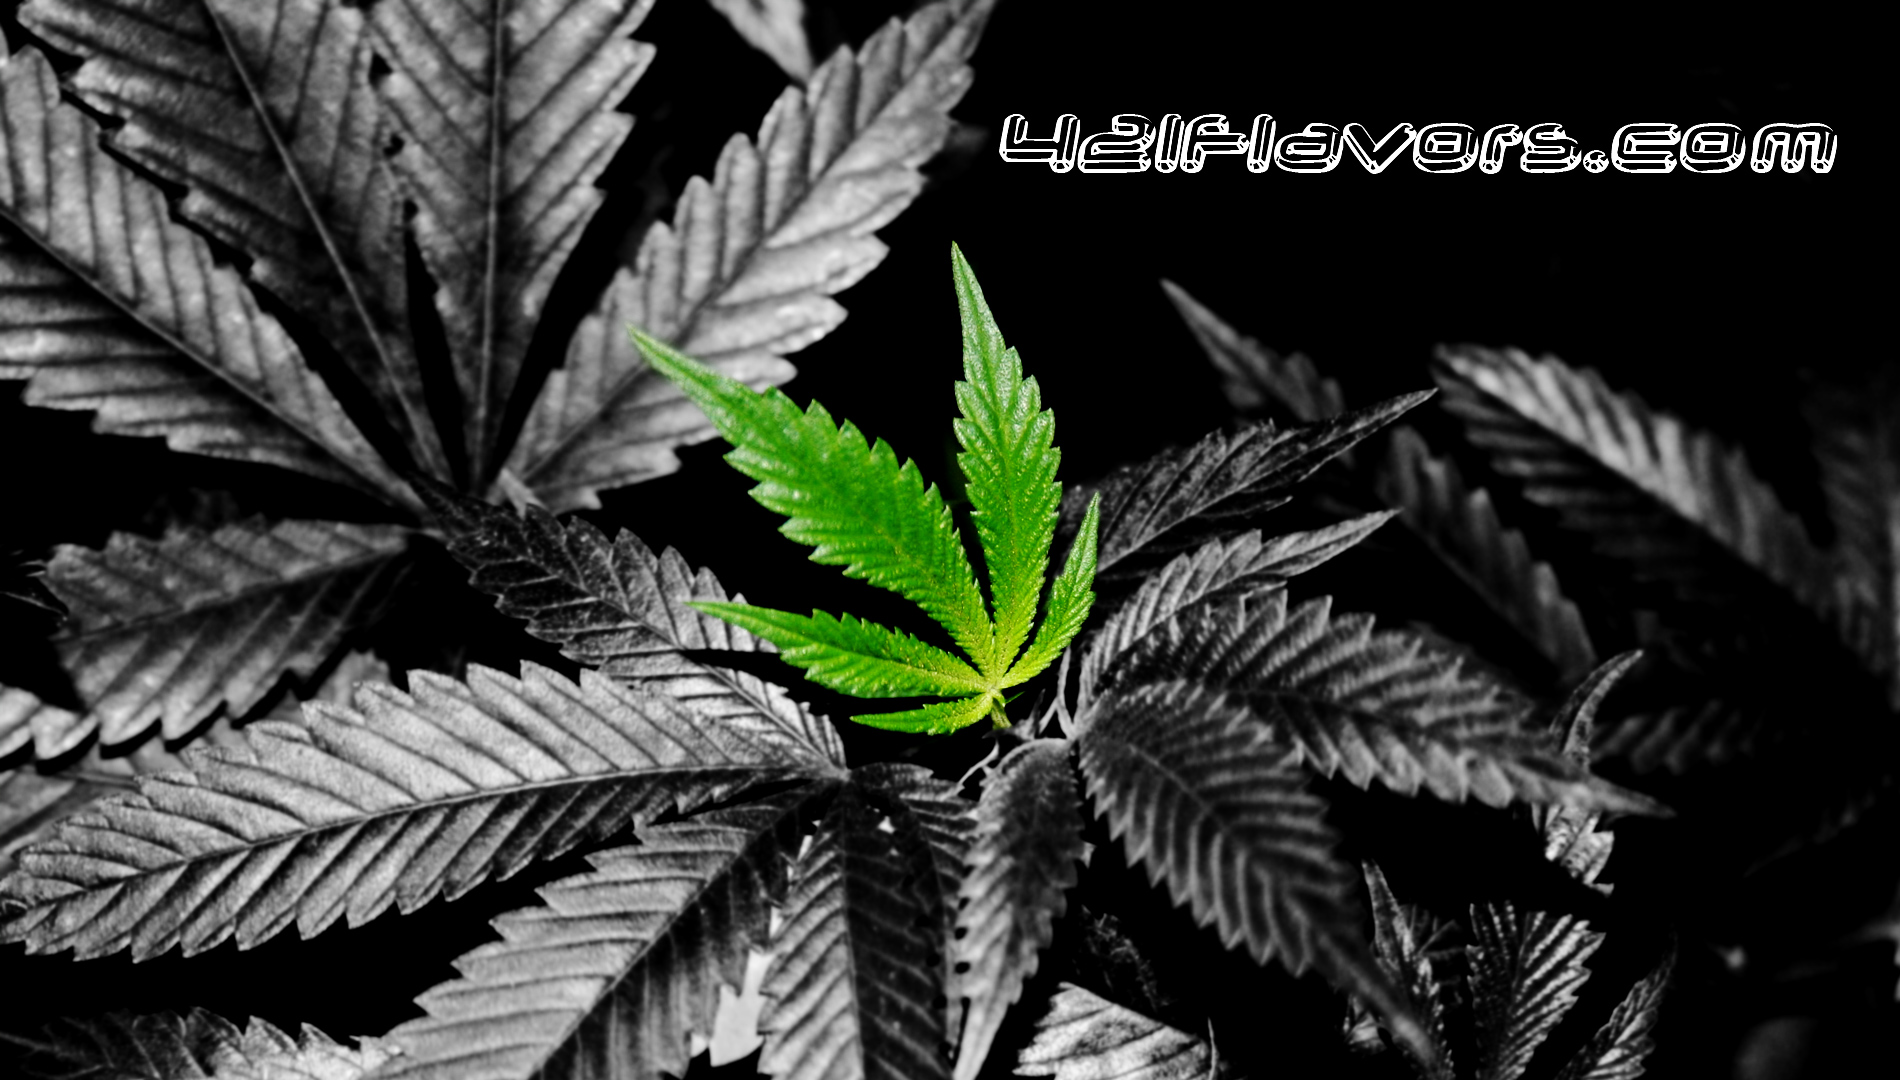 Cool weed leaf backgrounds danasrhg.top